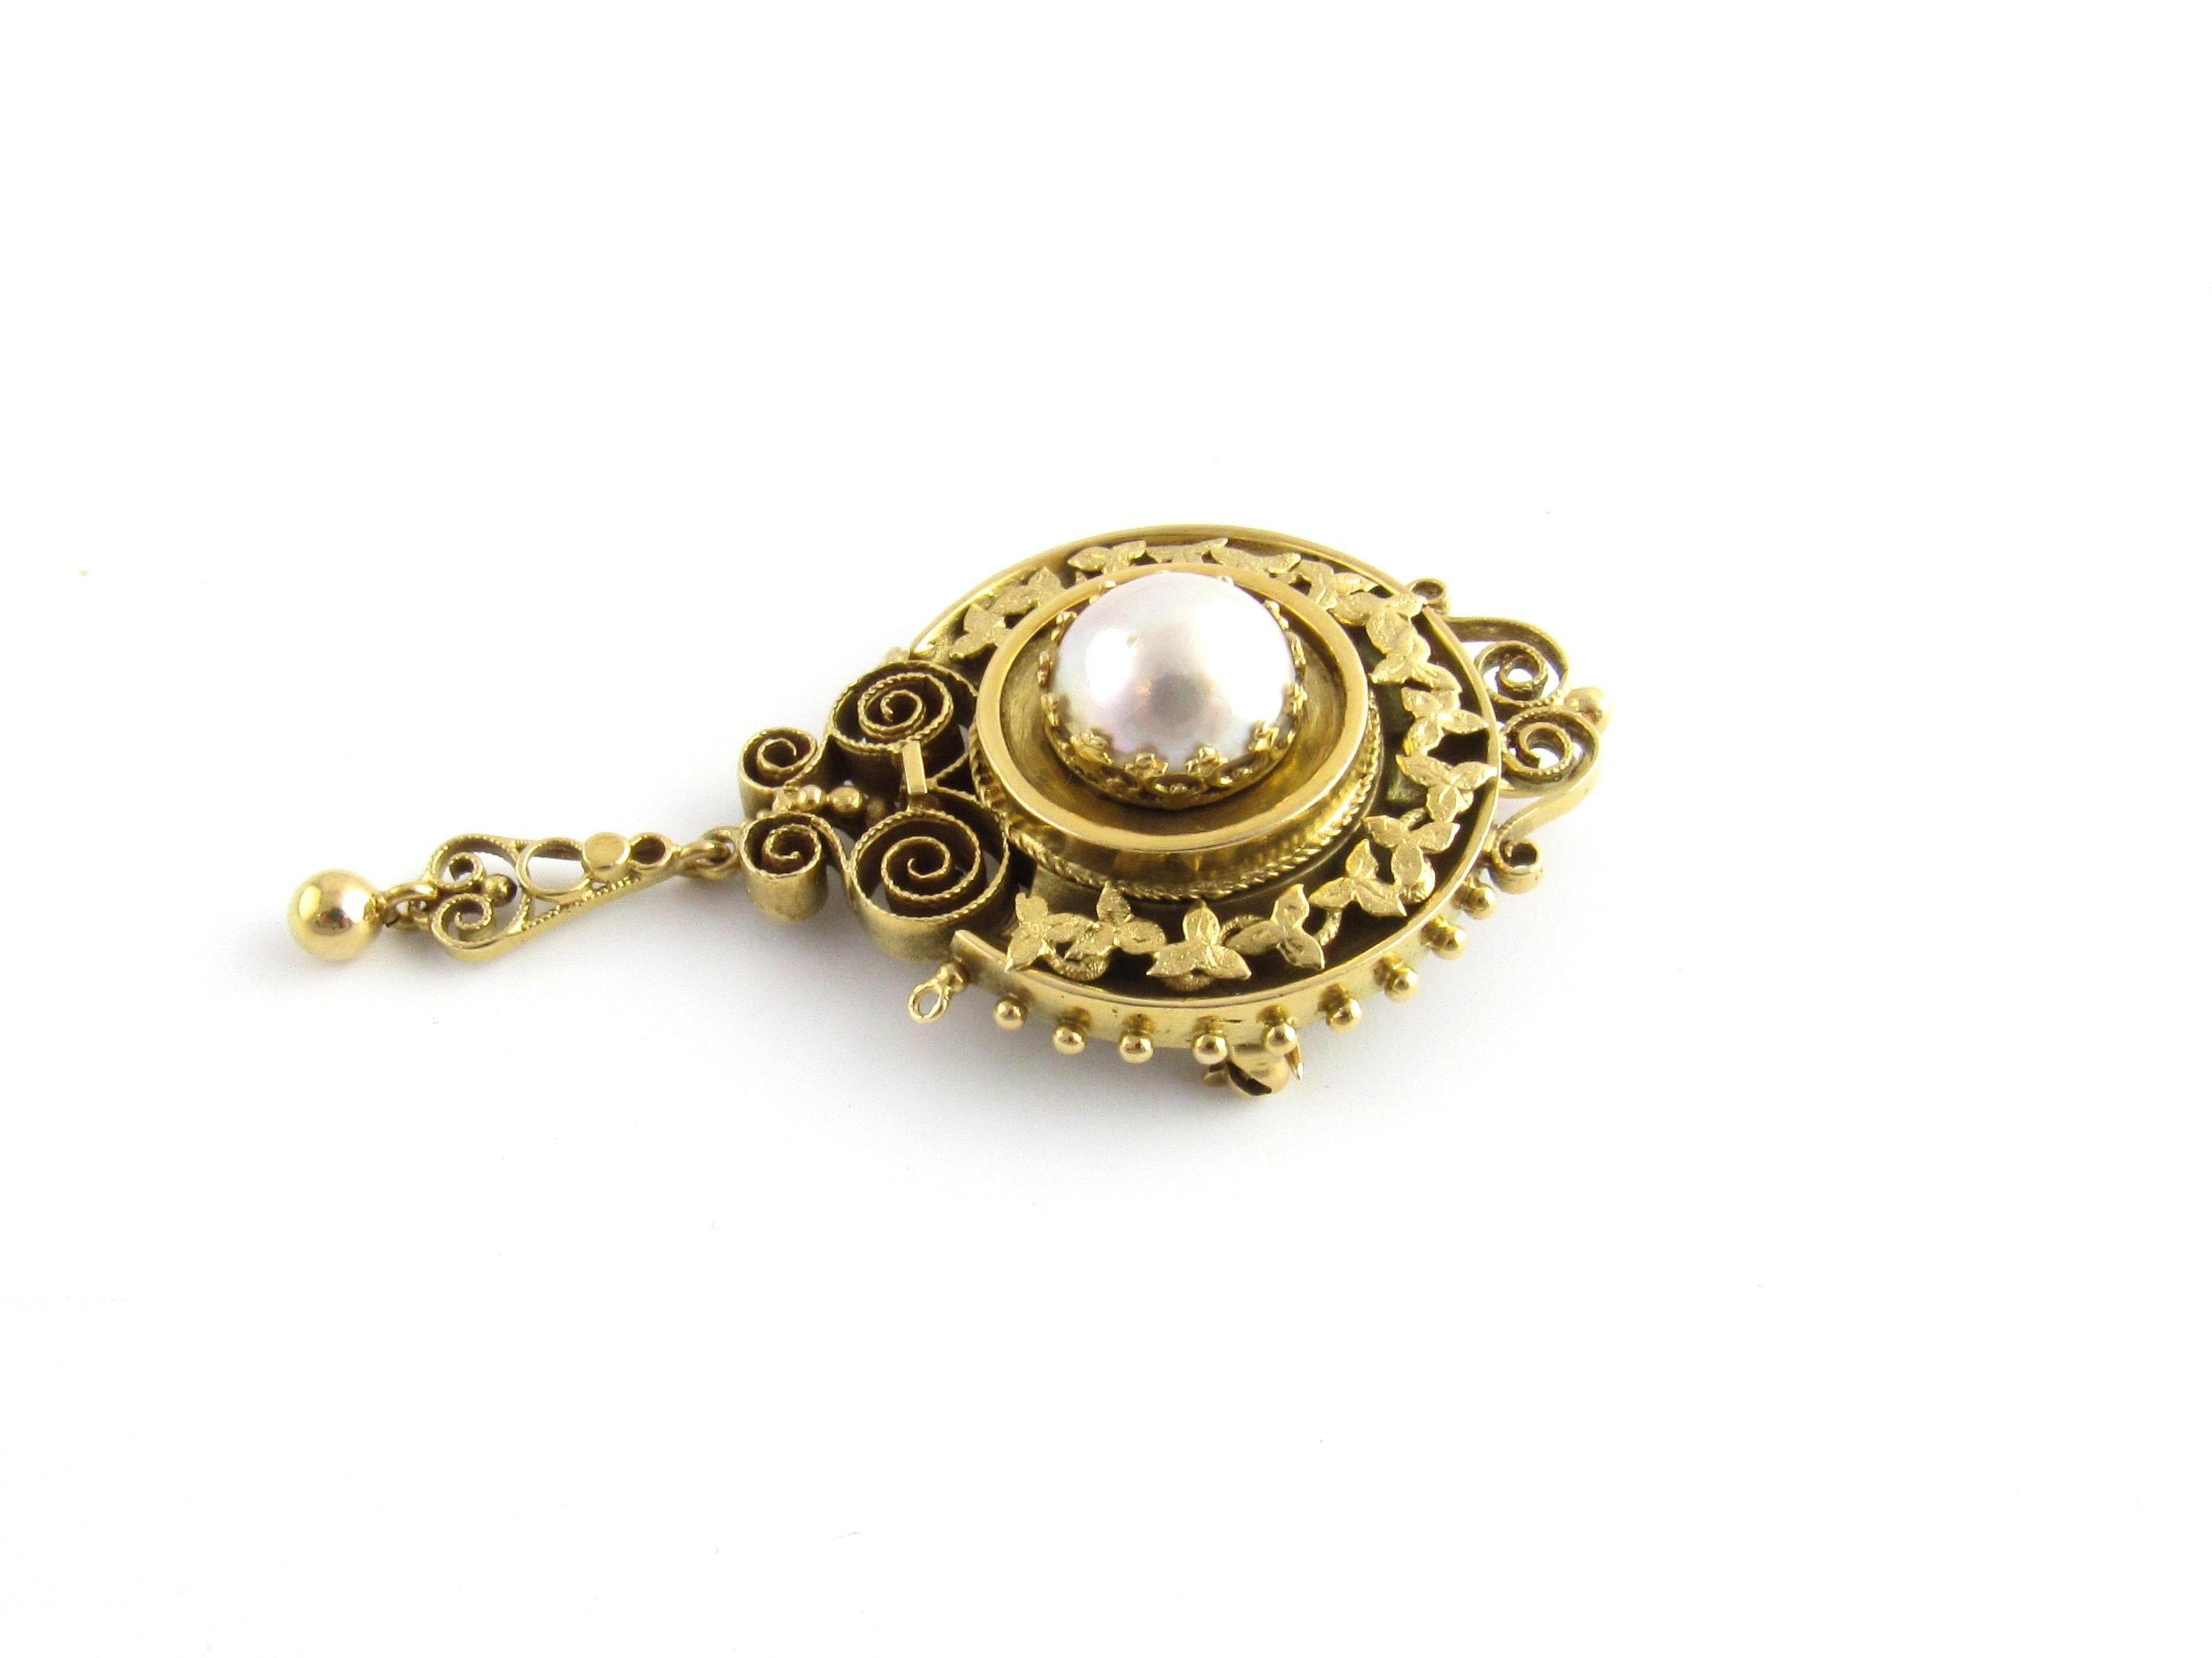 Women's Etruscan Revival 14K Yellow Gold and Mabe Pearl Pin Pendant For Sale